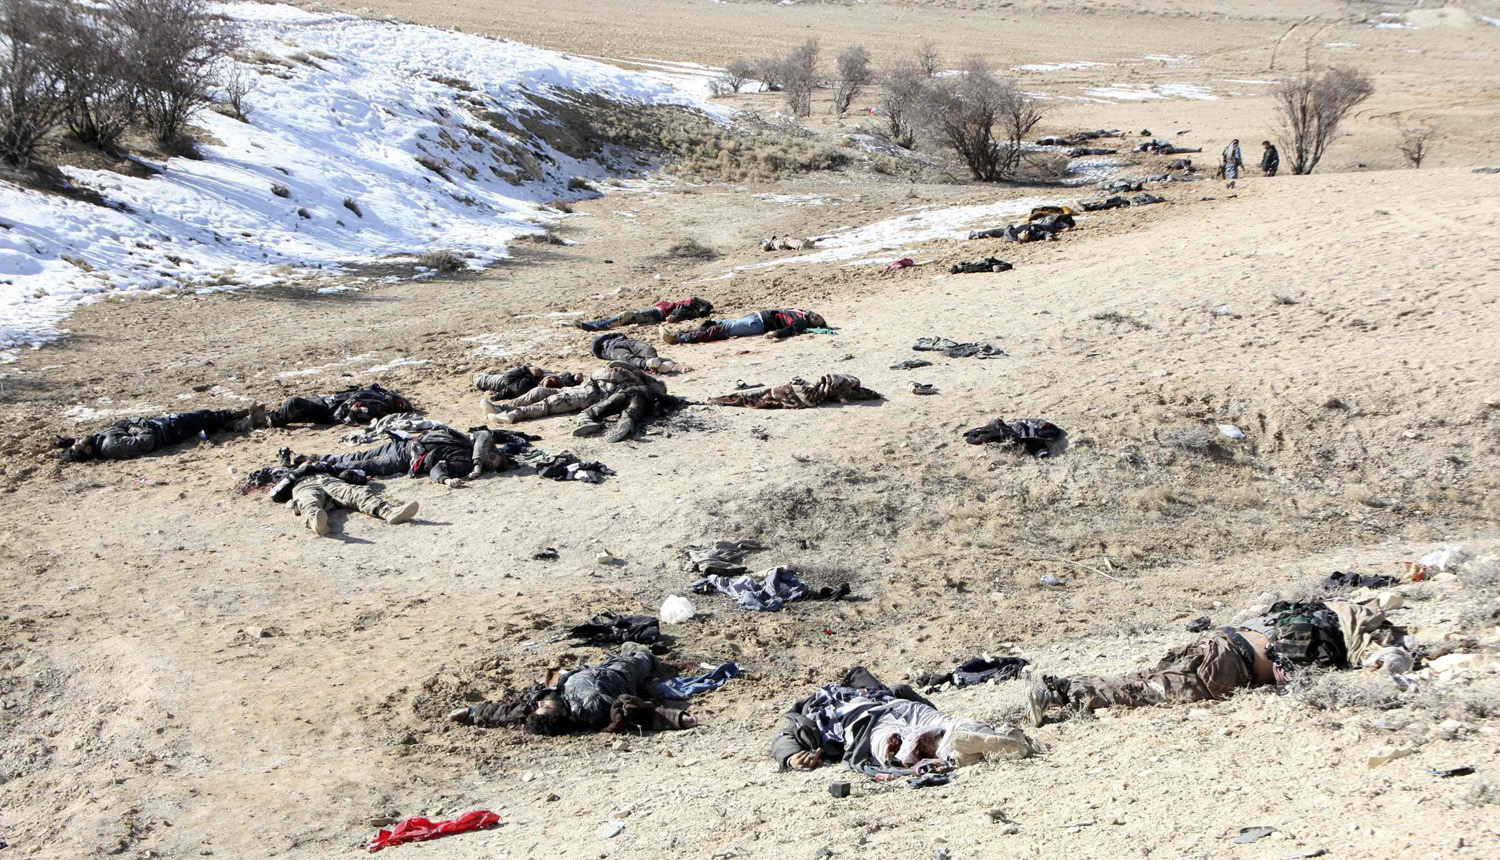 Dec. 27, 2013. Dead bodies are seen in the Qalamoun mountains, north of Damascus, in this handout photograph distributed by Syria's national news agency SANA. Syria's army ambushed Islamist fighters in the Qalamoun mountains north of the capital Damascus, leaving as many as 60 people dead, the Syrian Observatory for Human Rights said.